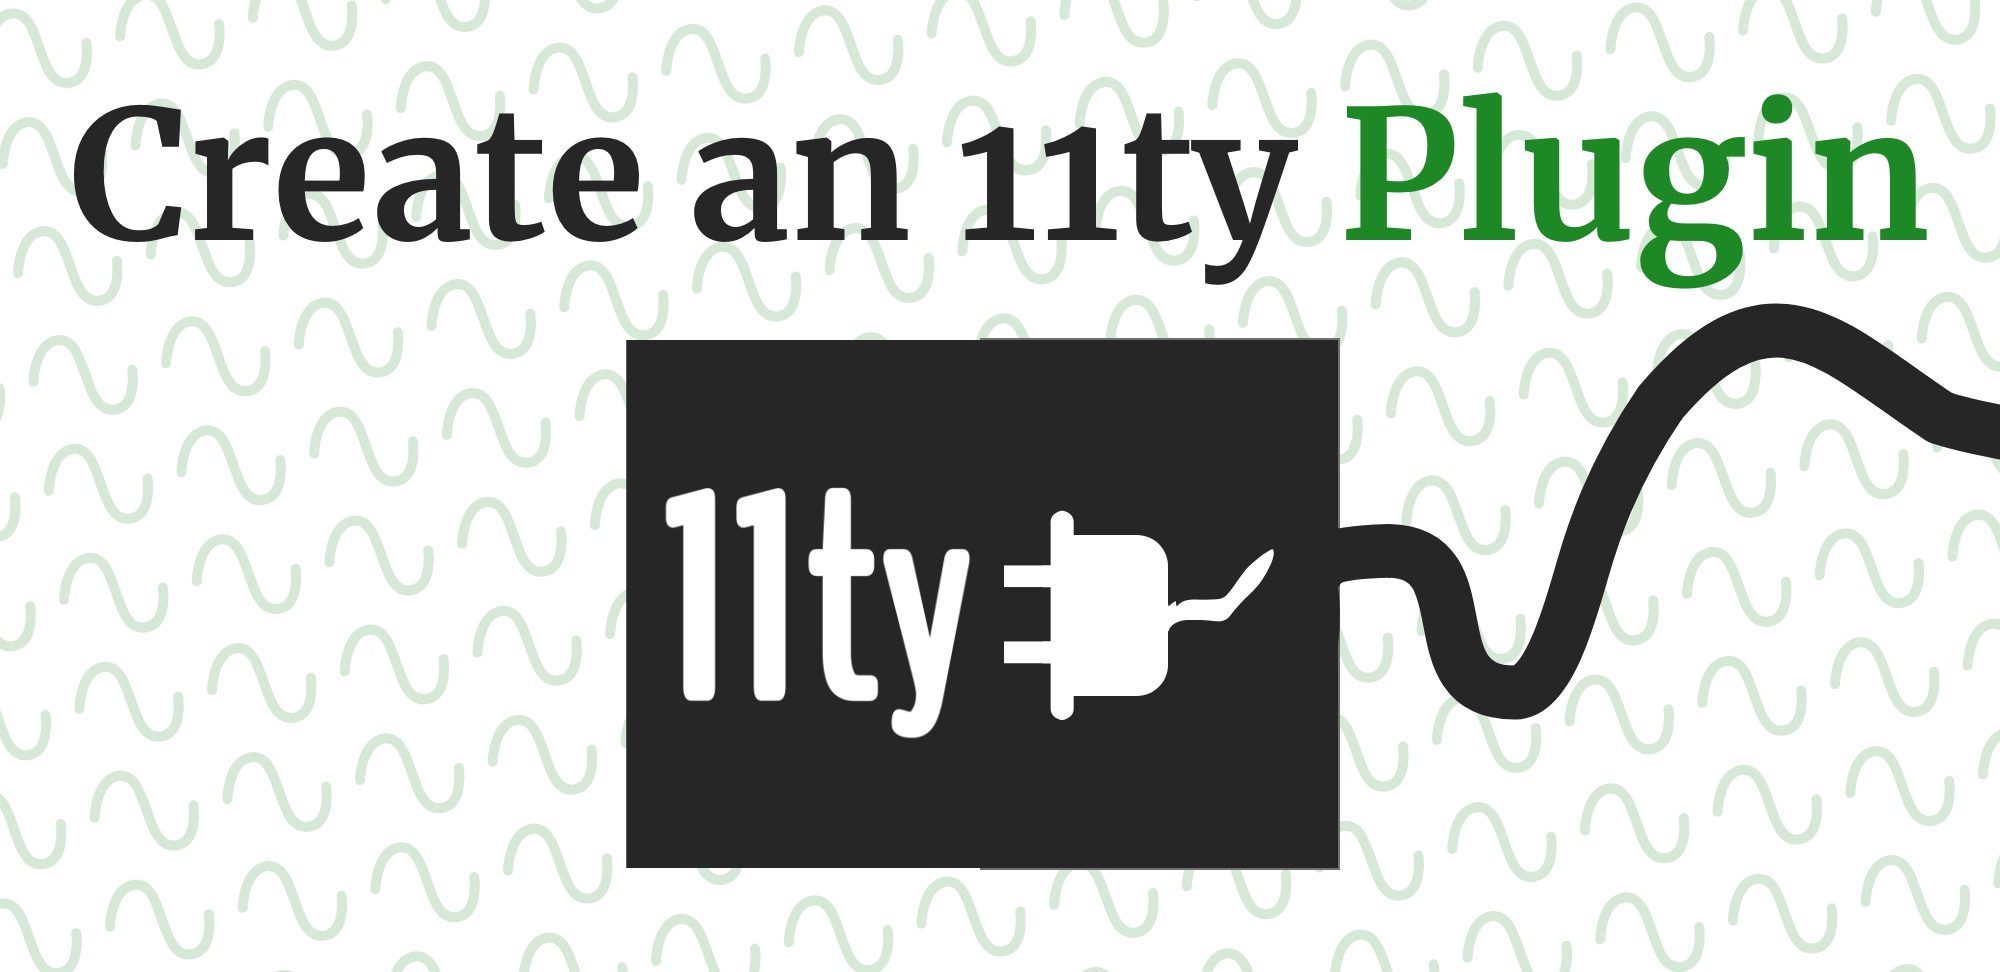 11ty Plugin banner image where a plug is coming out of the 11ty logo